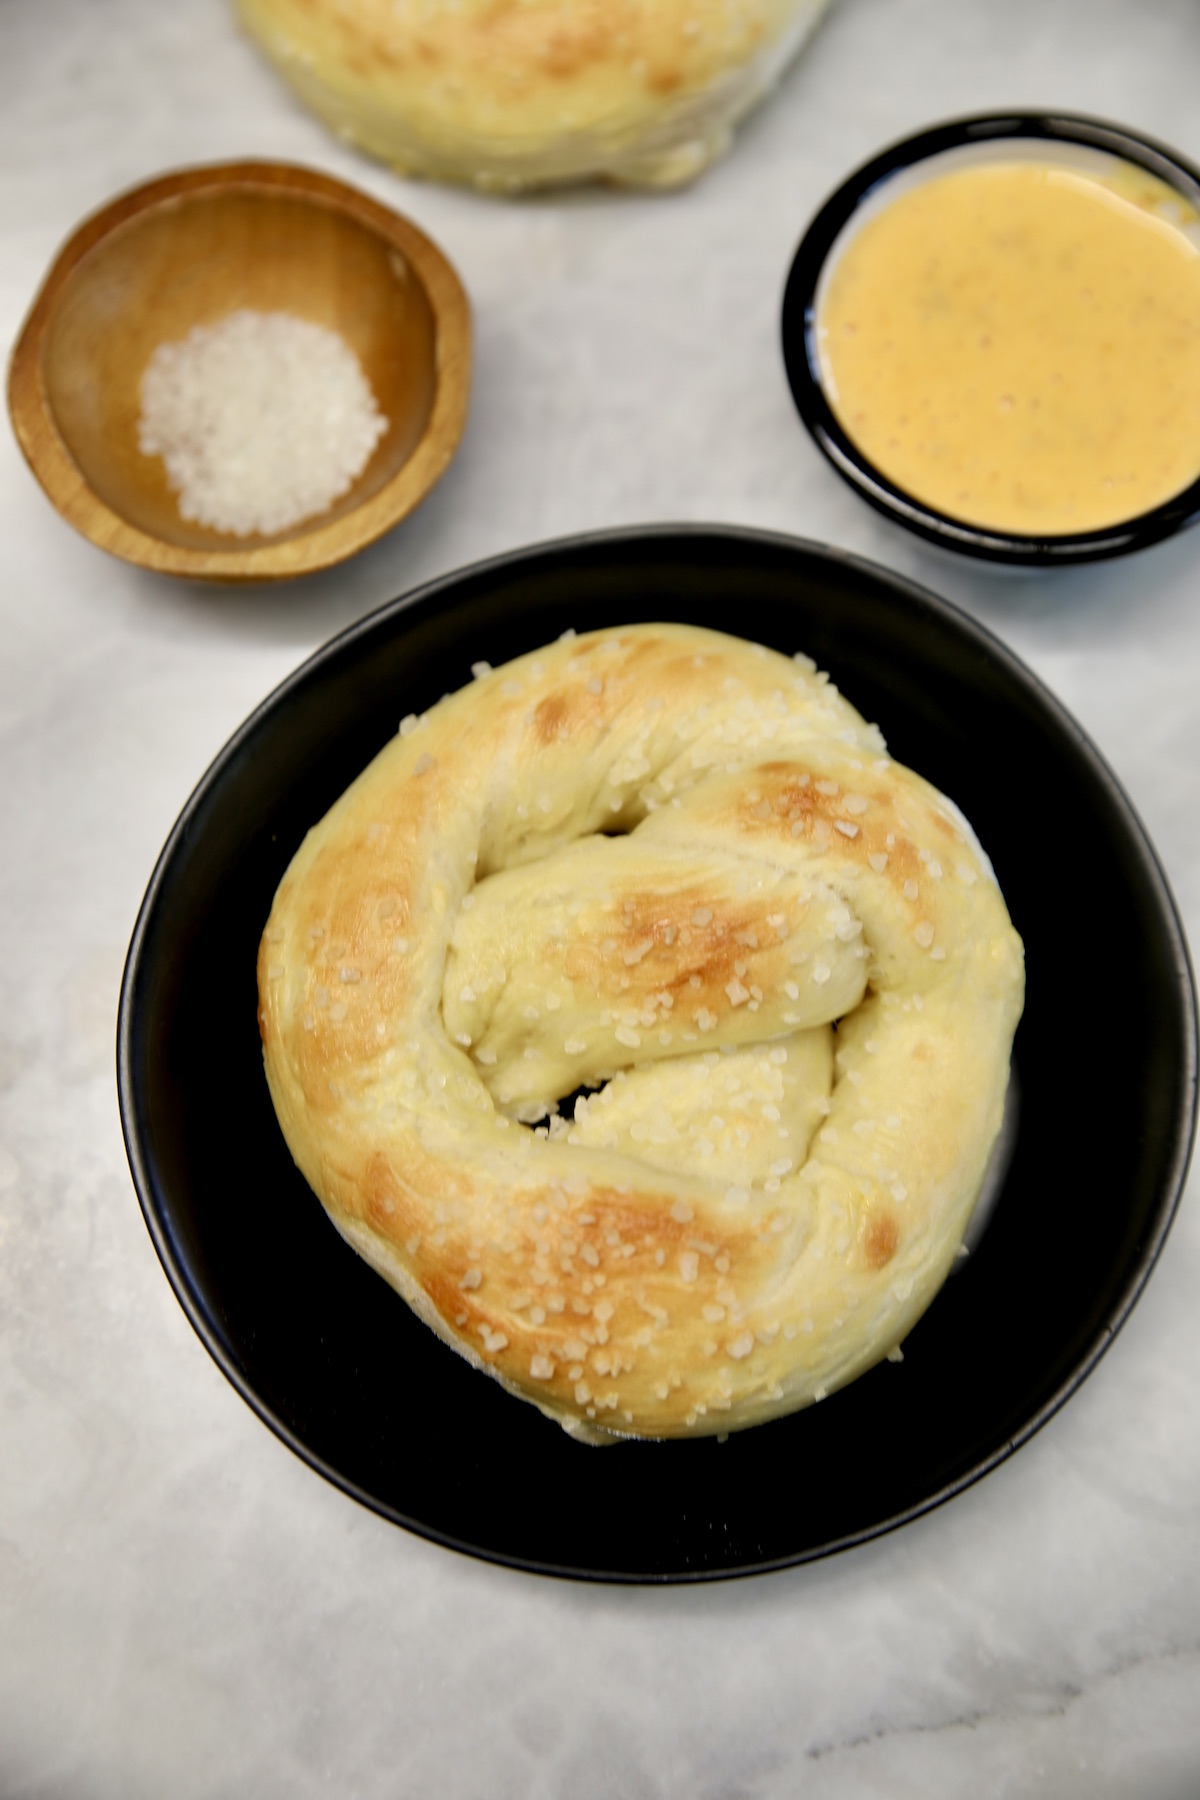 Soft pretzel in a bowl with bowl of salt and bowl of cheese sauce.